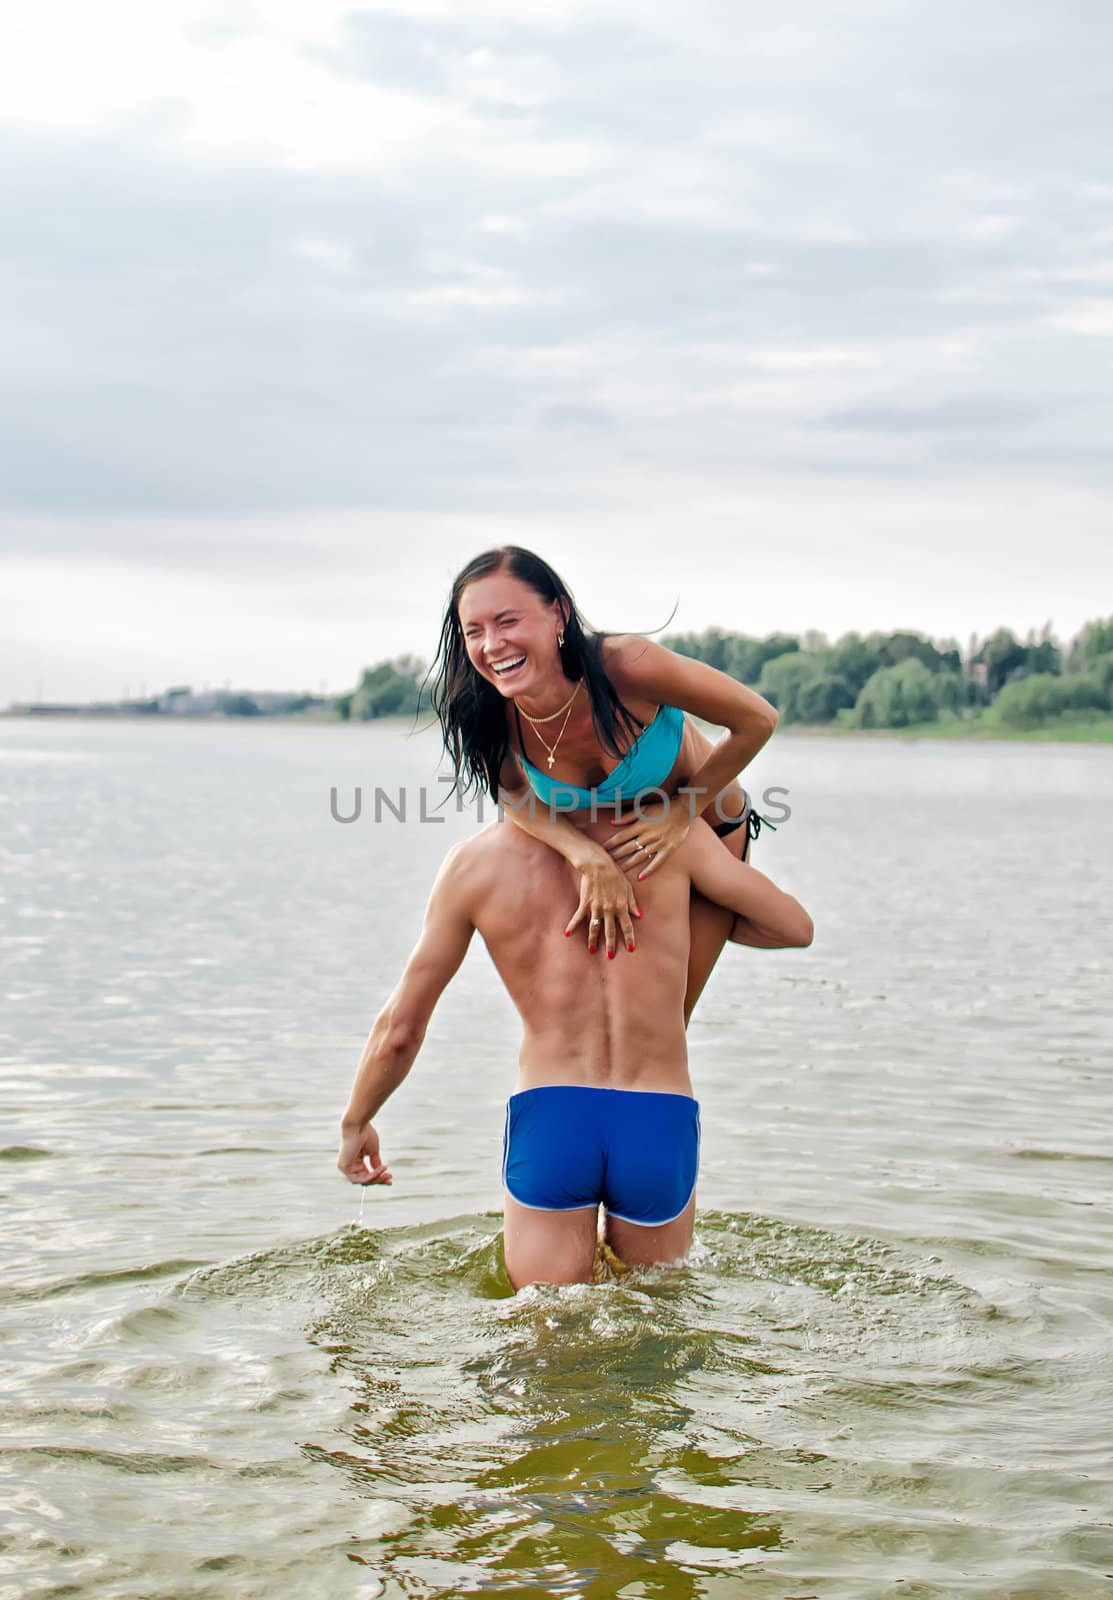 Man carrying woman on shoulder in the sea by dmitrimaruta